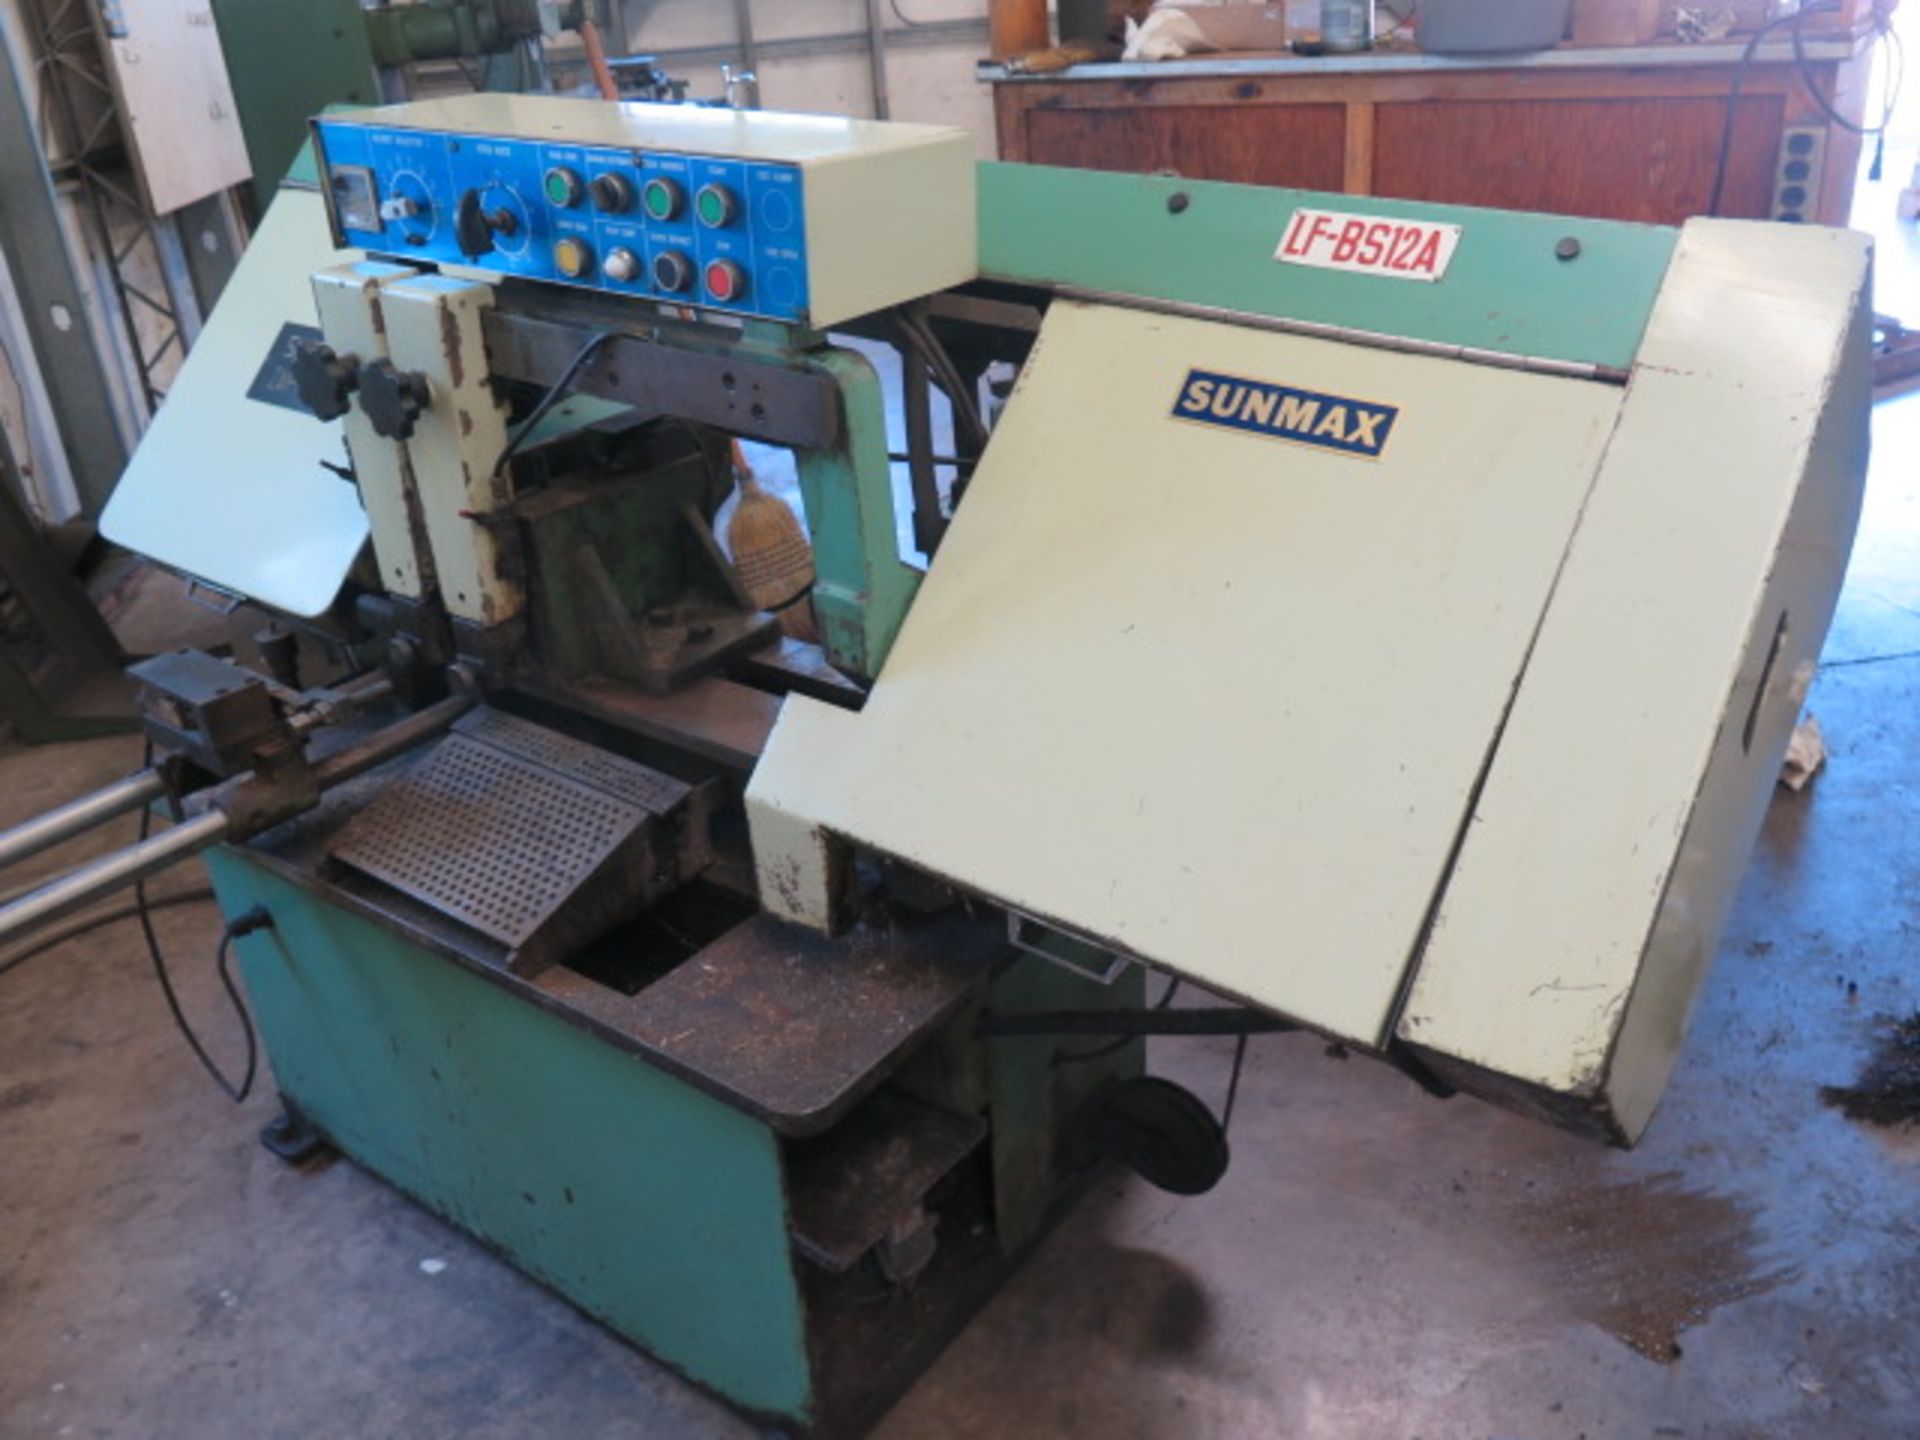 Enco BS-12A 12” Auto Horizontal Band Saw s/n 12434 w/ Controls, 6-Speeds, Auto Feed, SOLD AS IS - Image 2 of 16